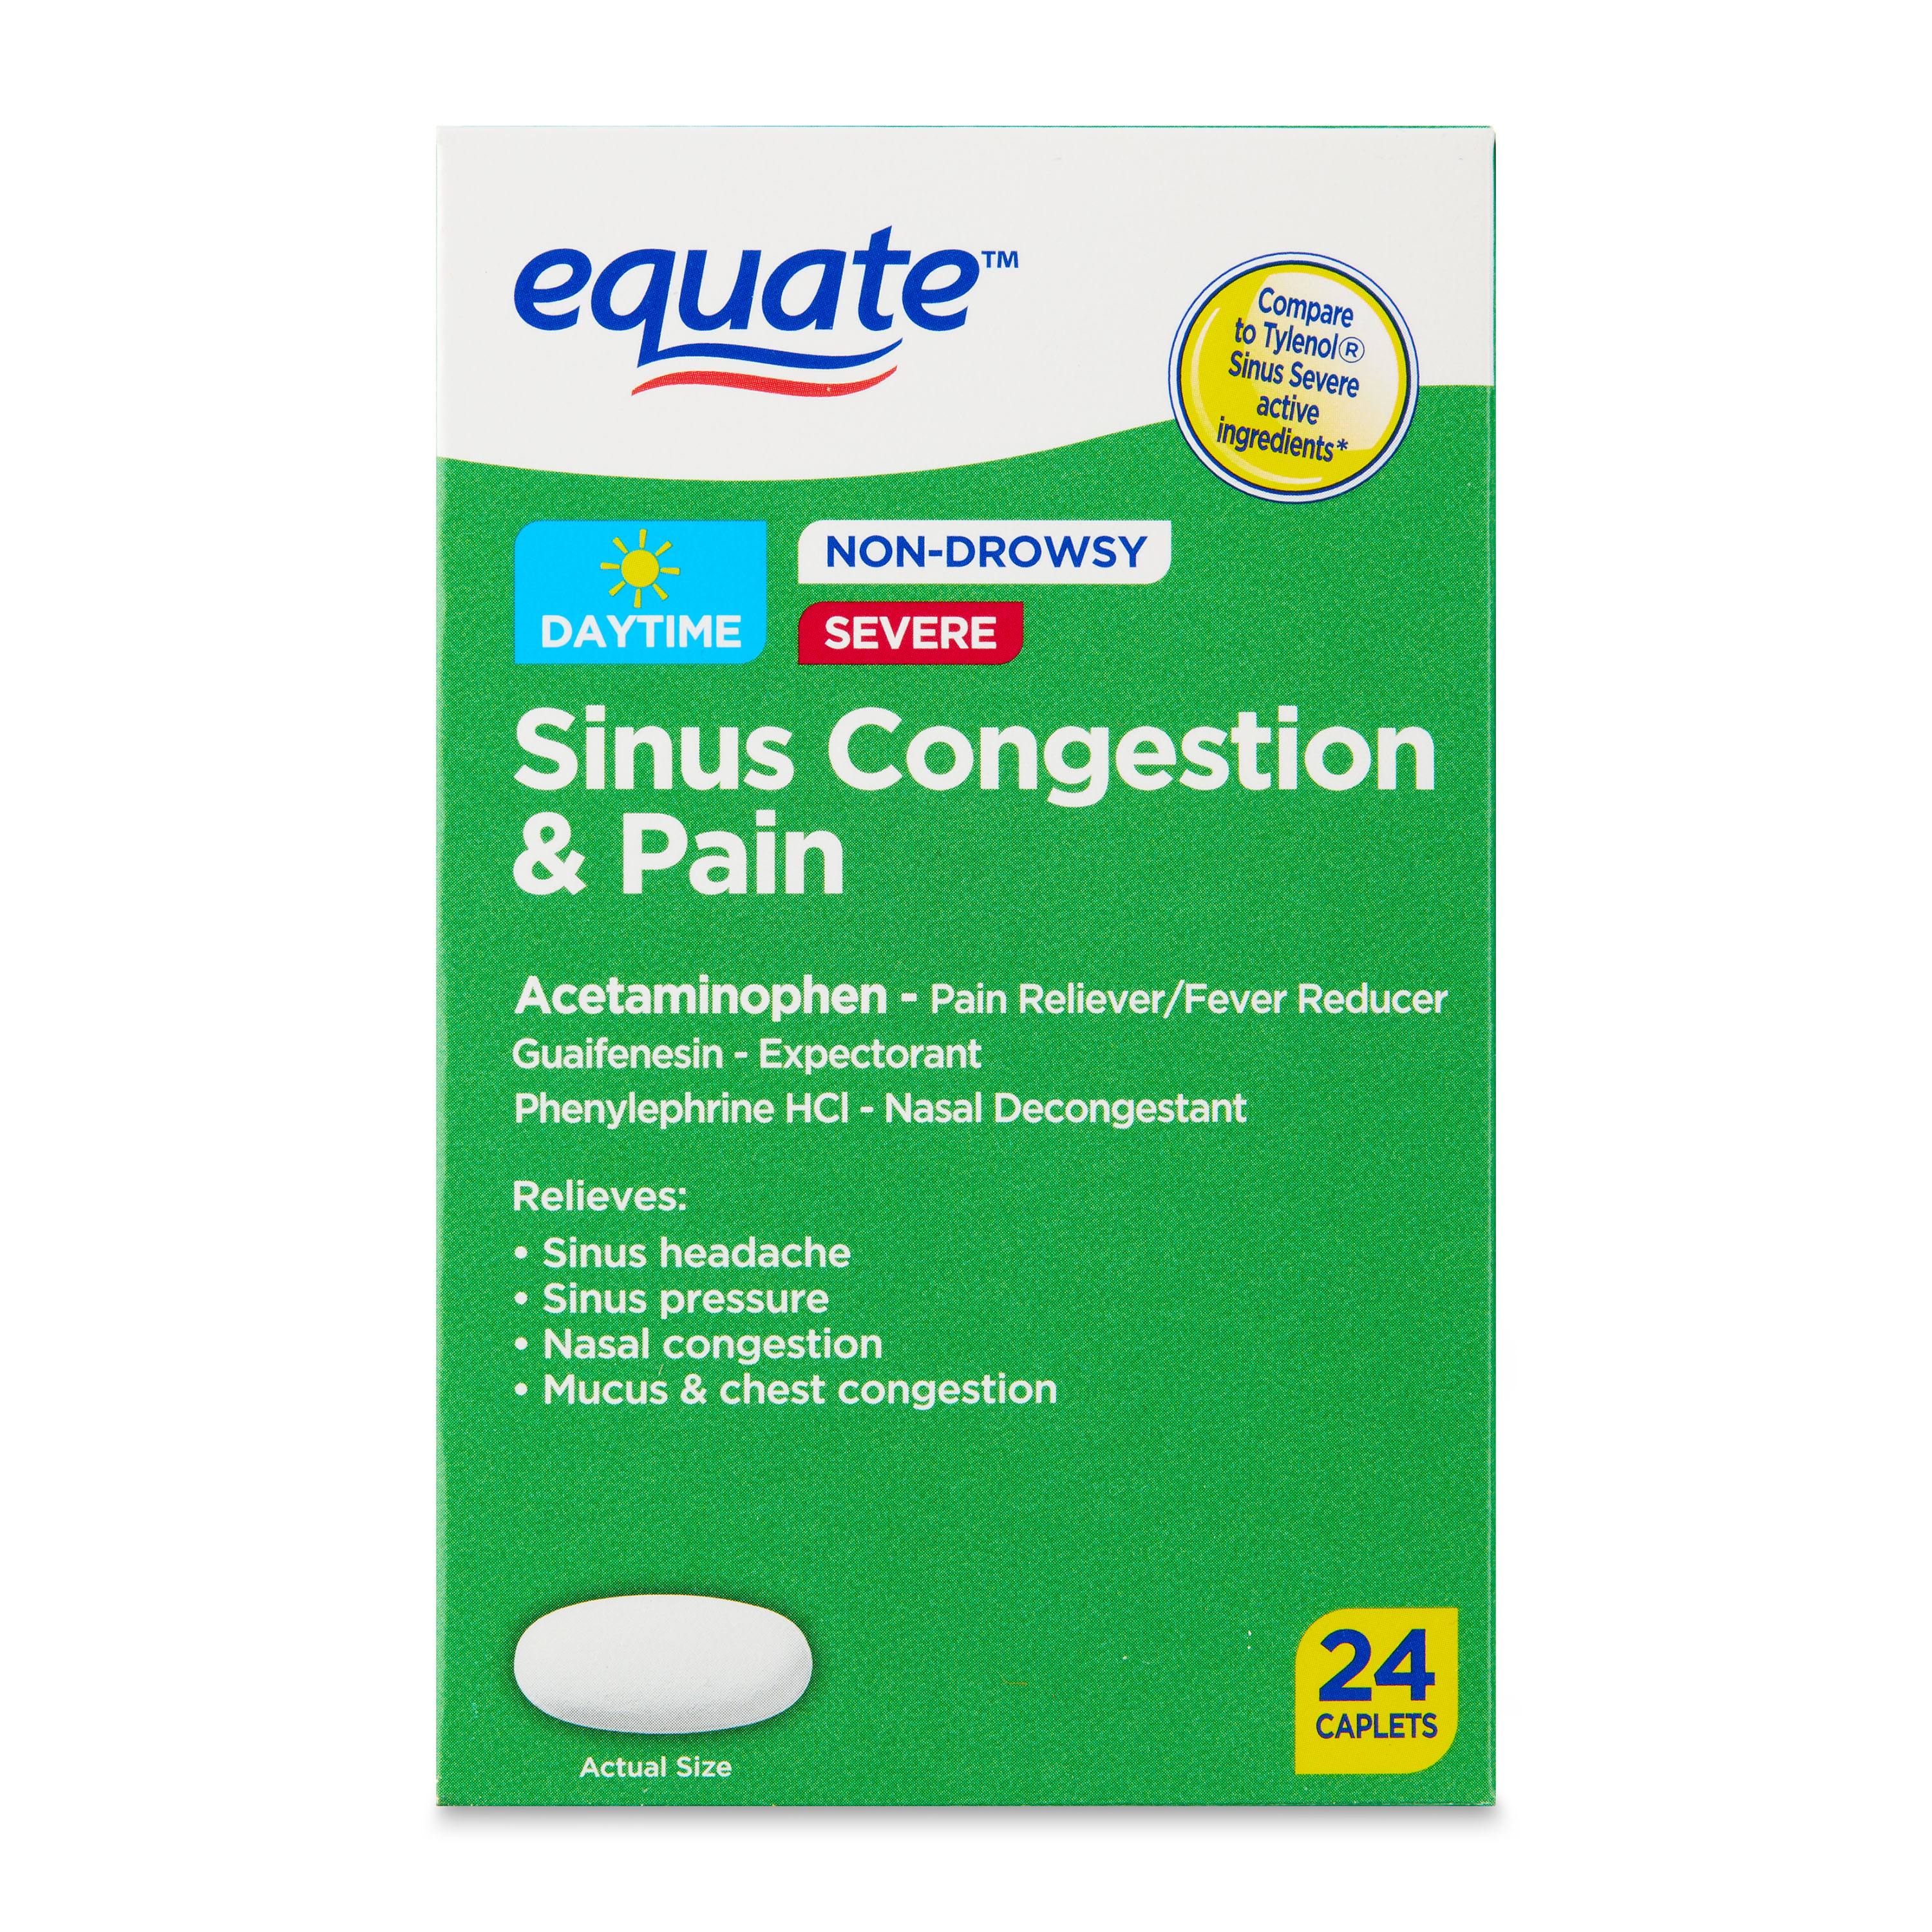 Equate Severe Sinus Congestion & Pain Acetaminophen Caplets 325mg, 24 Count - image 1 of 10